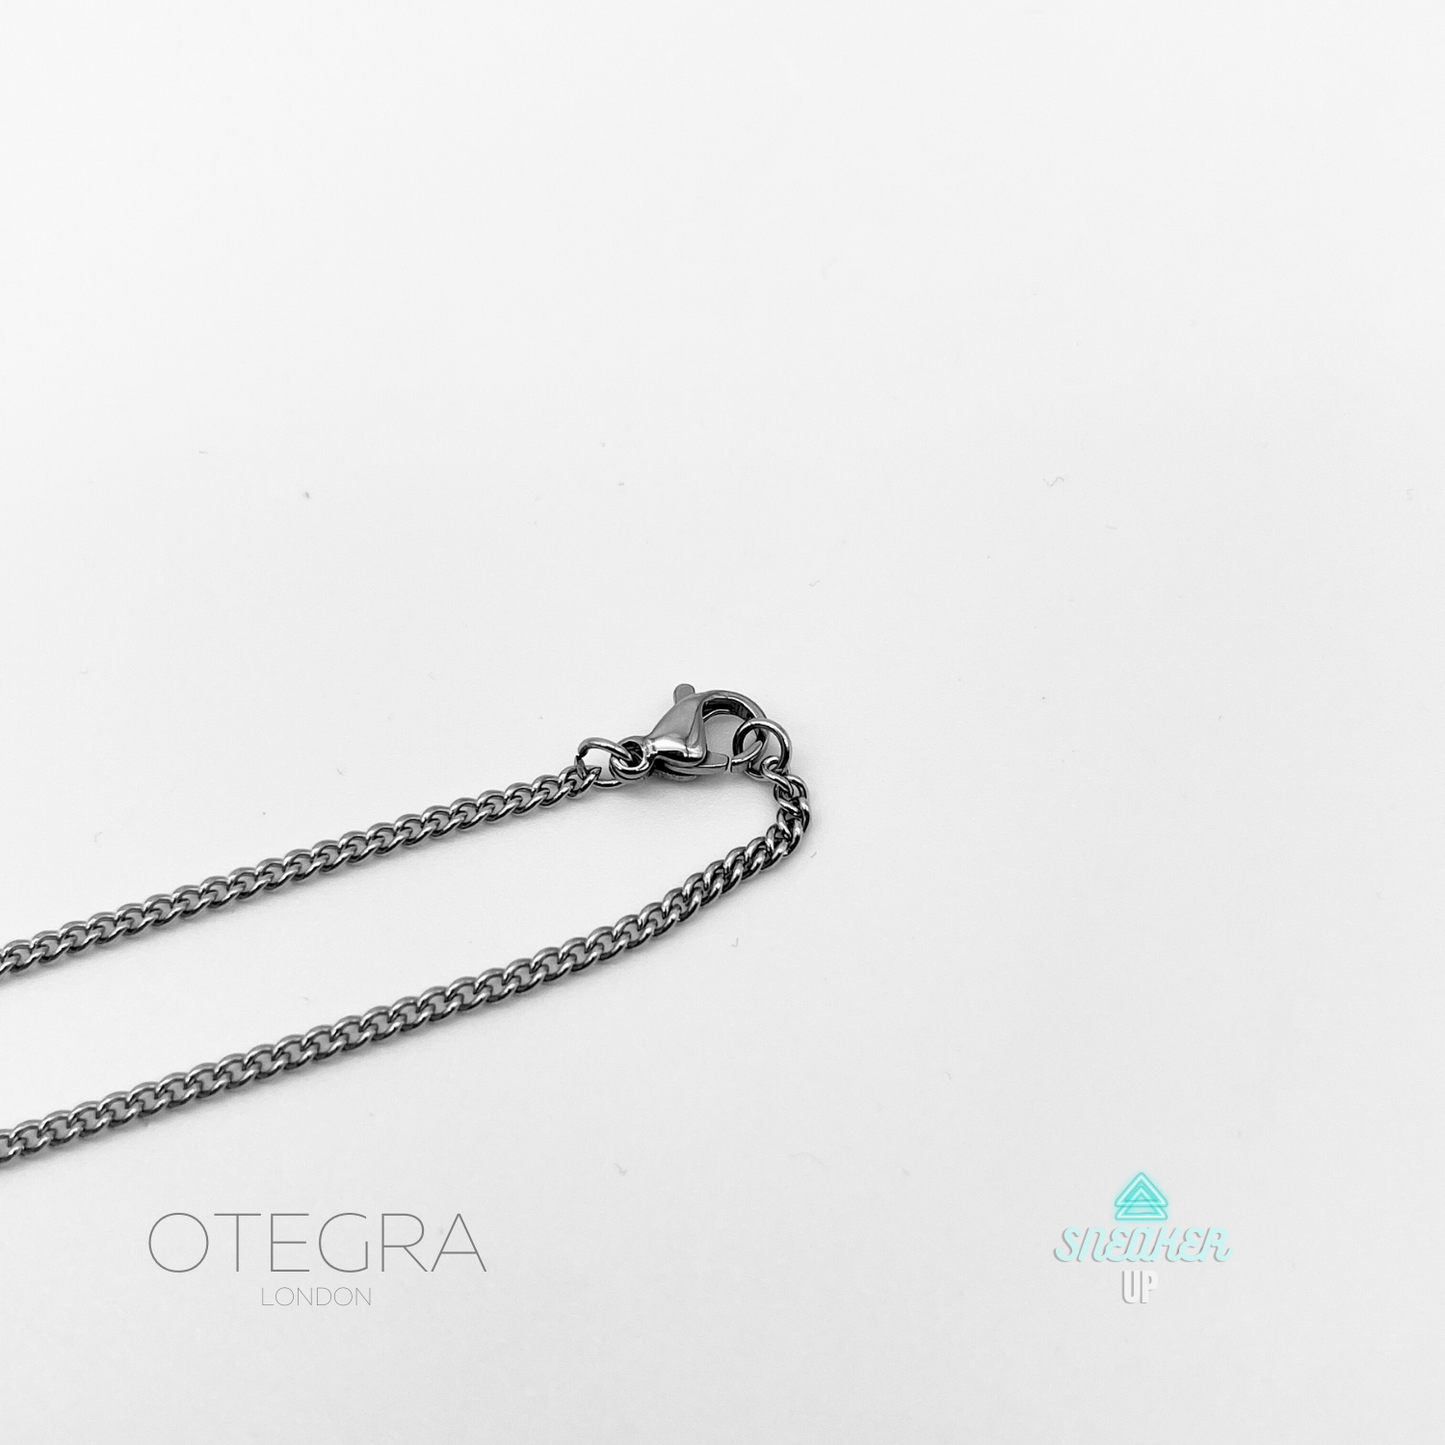 OTEGRA London 2.5mm Silver Chain Necklace